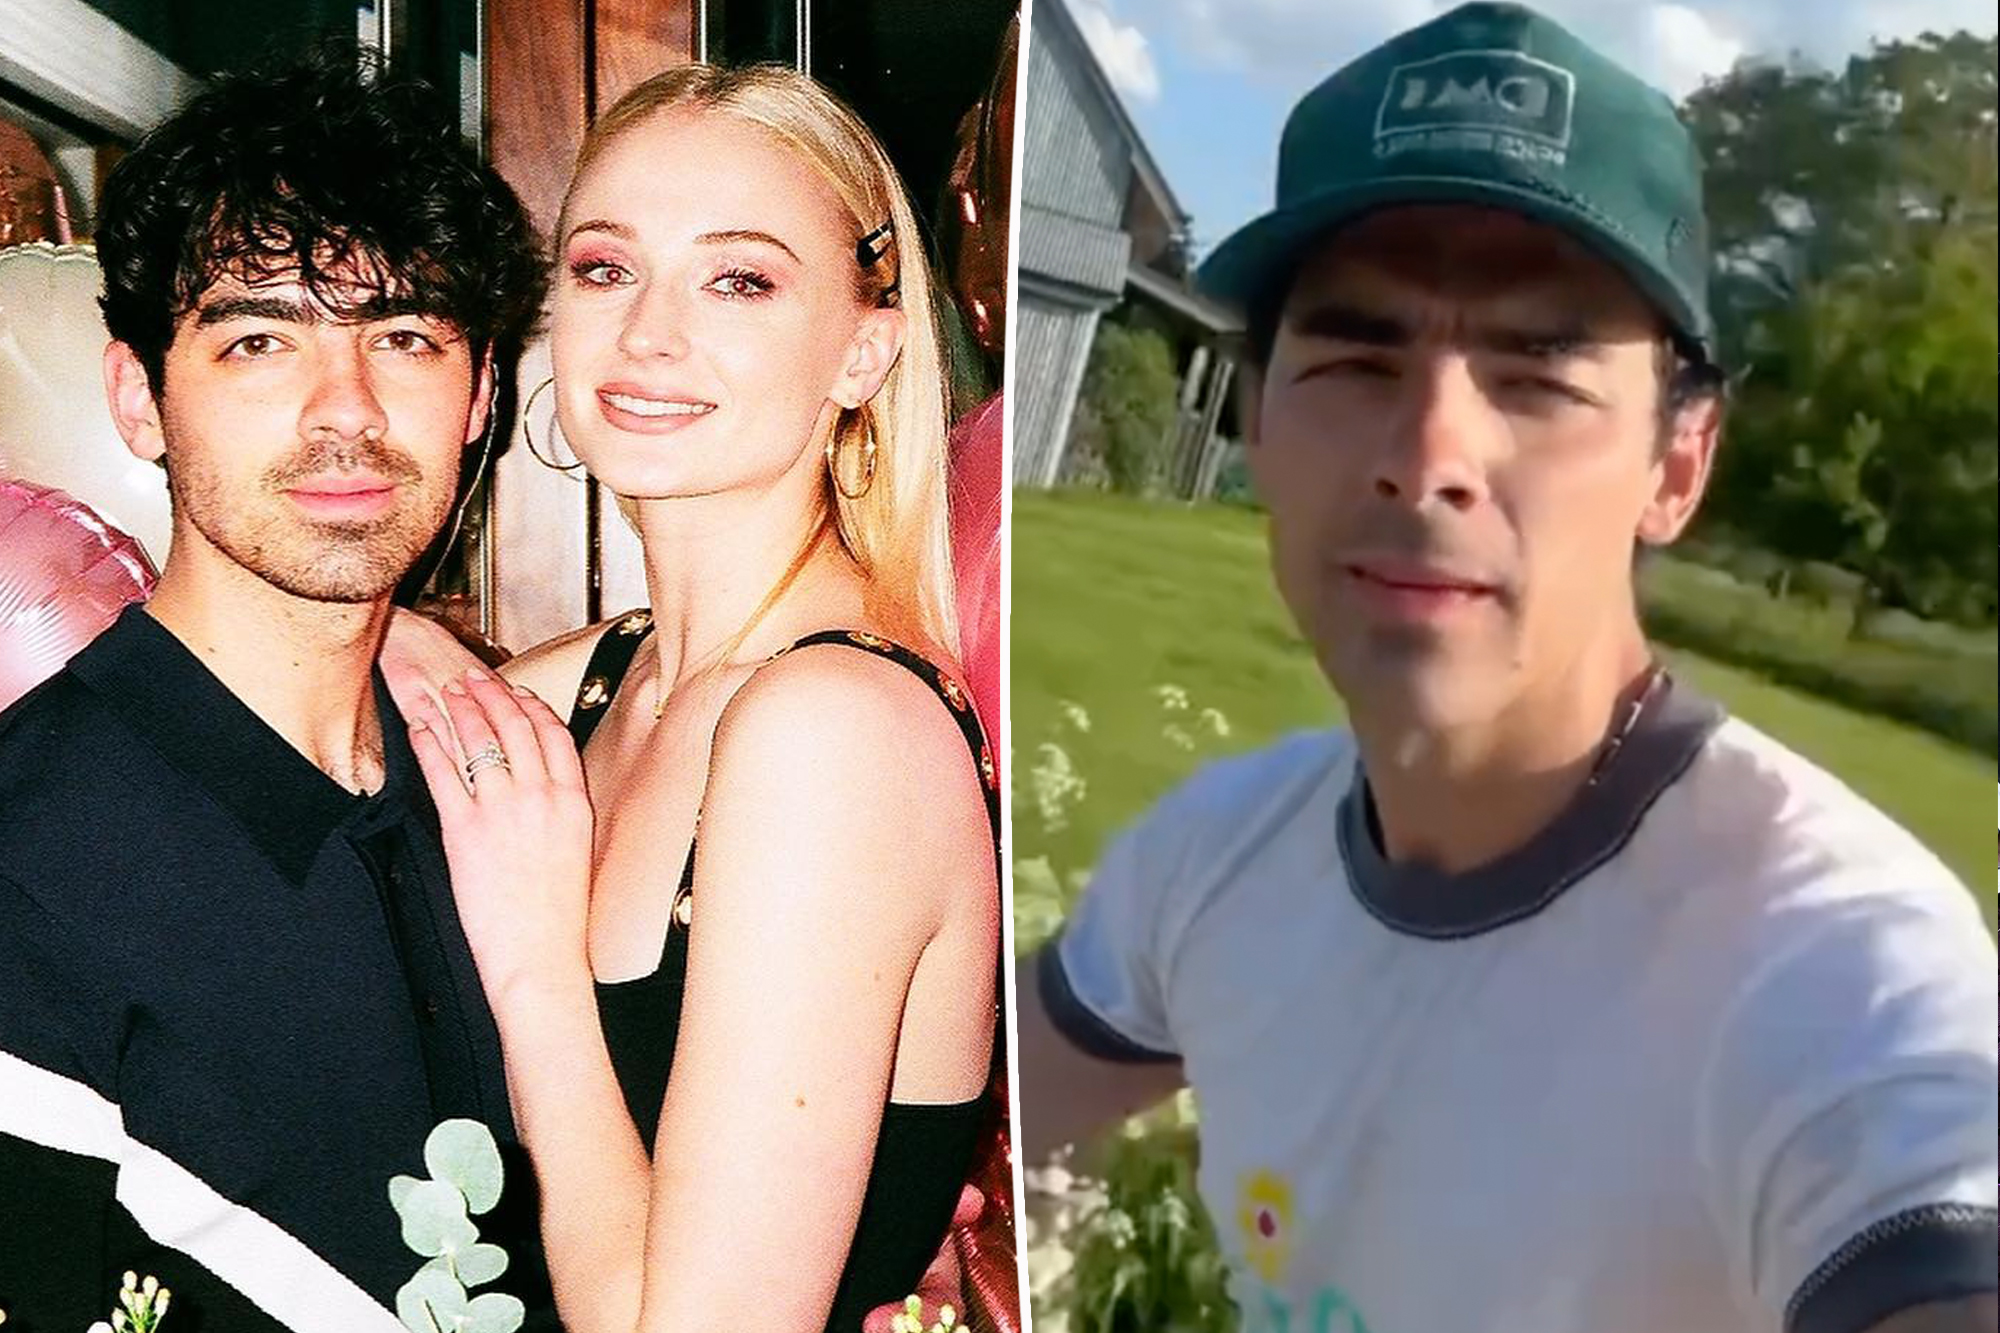 Joe Jonas Opens Up About Divorce in New Song